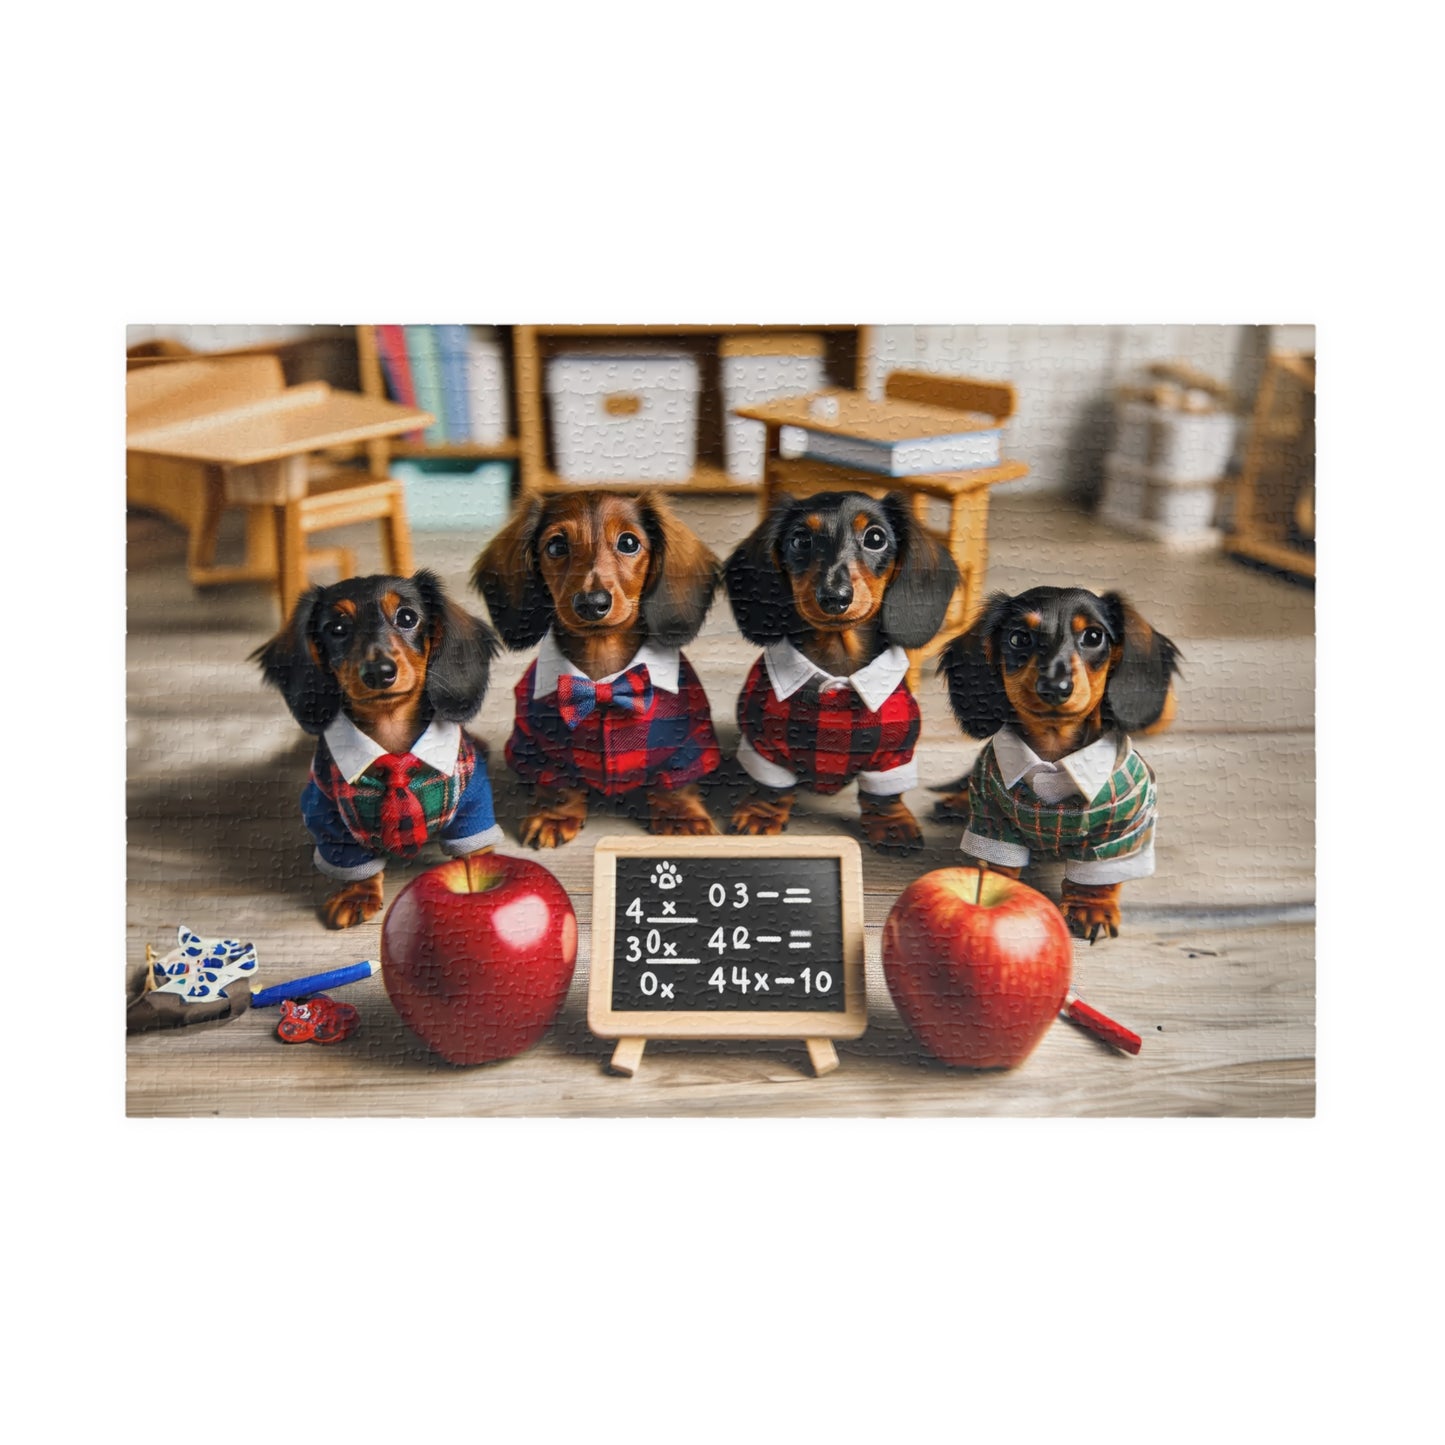 Adorable Mini Dachshund Classroom Puzzle - Doxie Puppy Scholars, Horizontal Jigsaw, Educational Family Game (110/252/520/1014 Pieces)